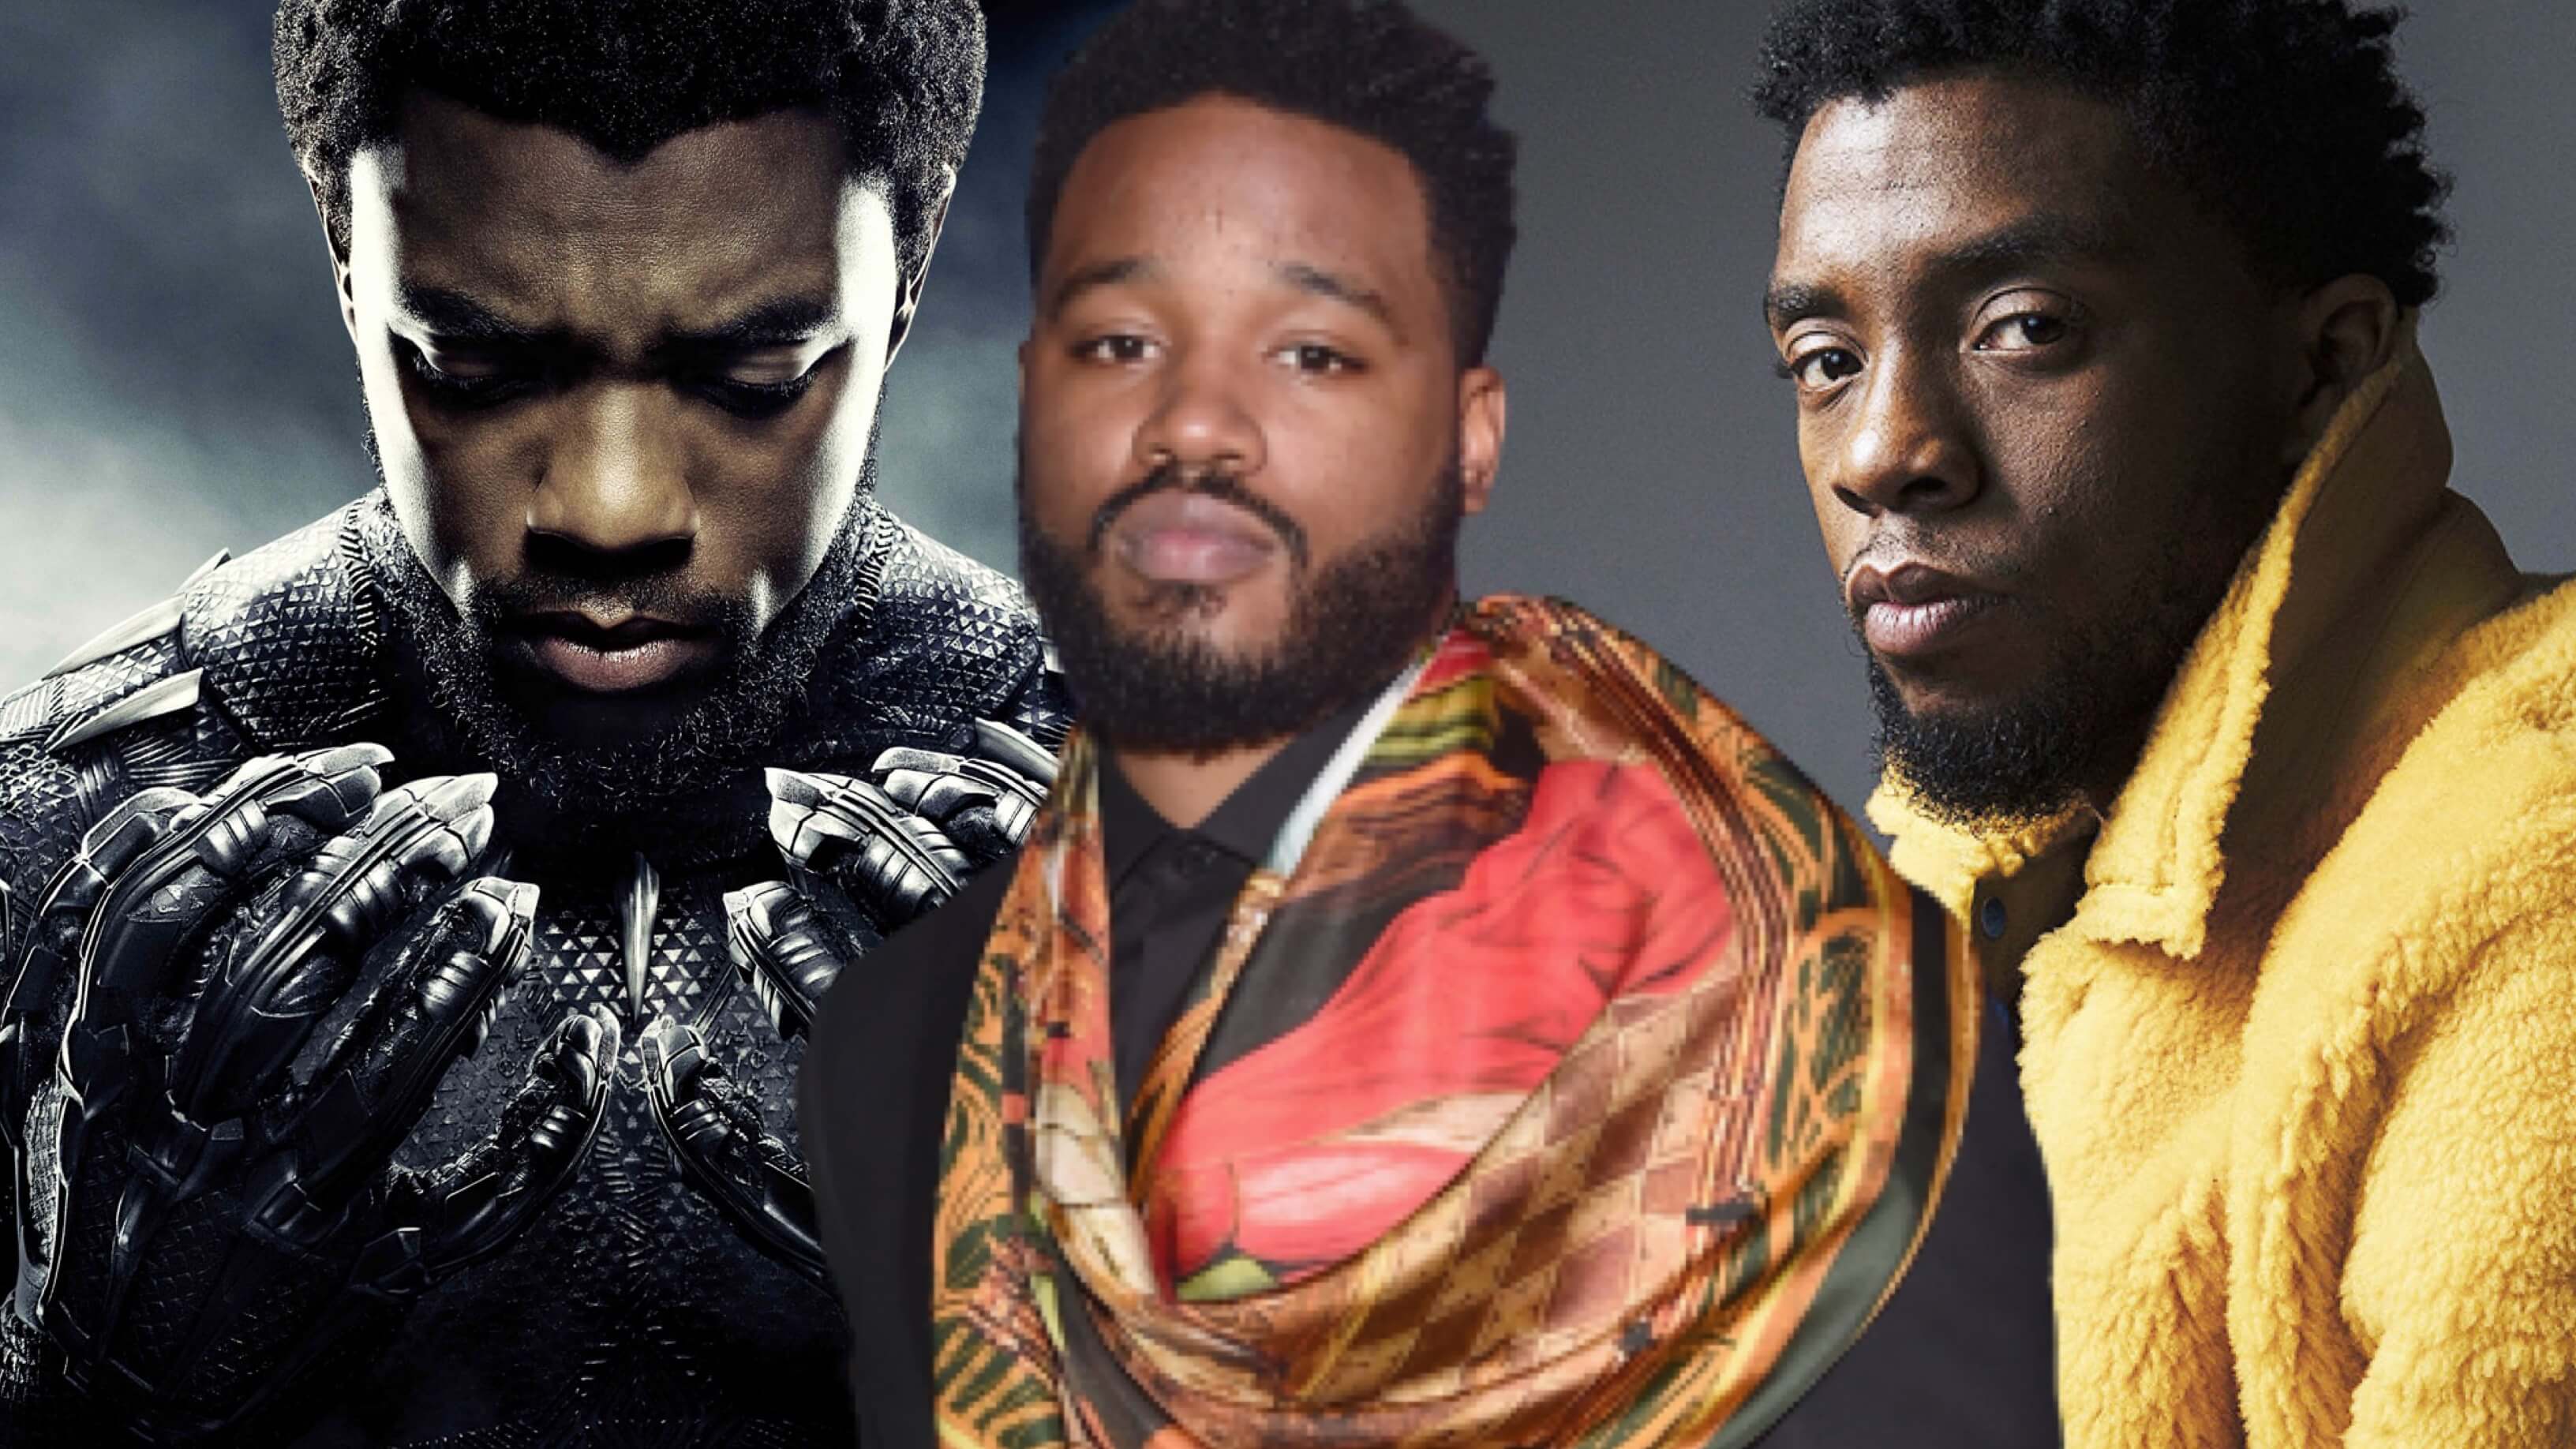 ’Black Panther’ Director Ryan Coogler Releases Beautiful Statement on Chadwick Boseman’s Passing; ABC to Pay Tribute